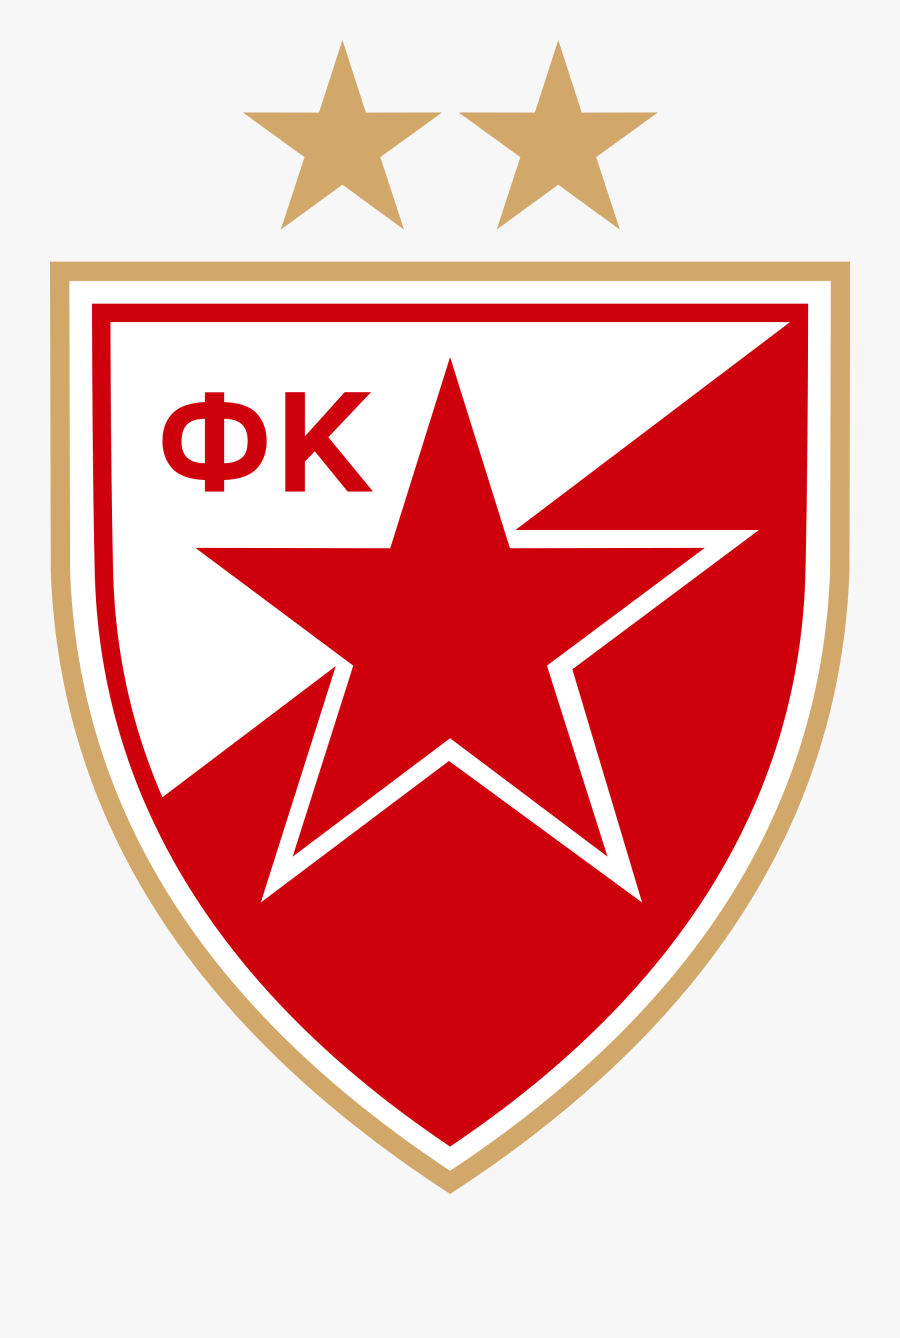 Free Red Star Picture, Download Free Clip Art, Free - Red Star Belgrade Badge, Transparent Clipart